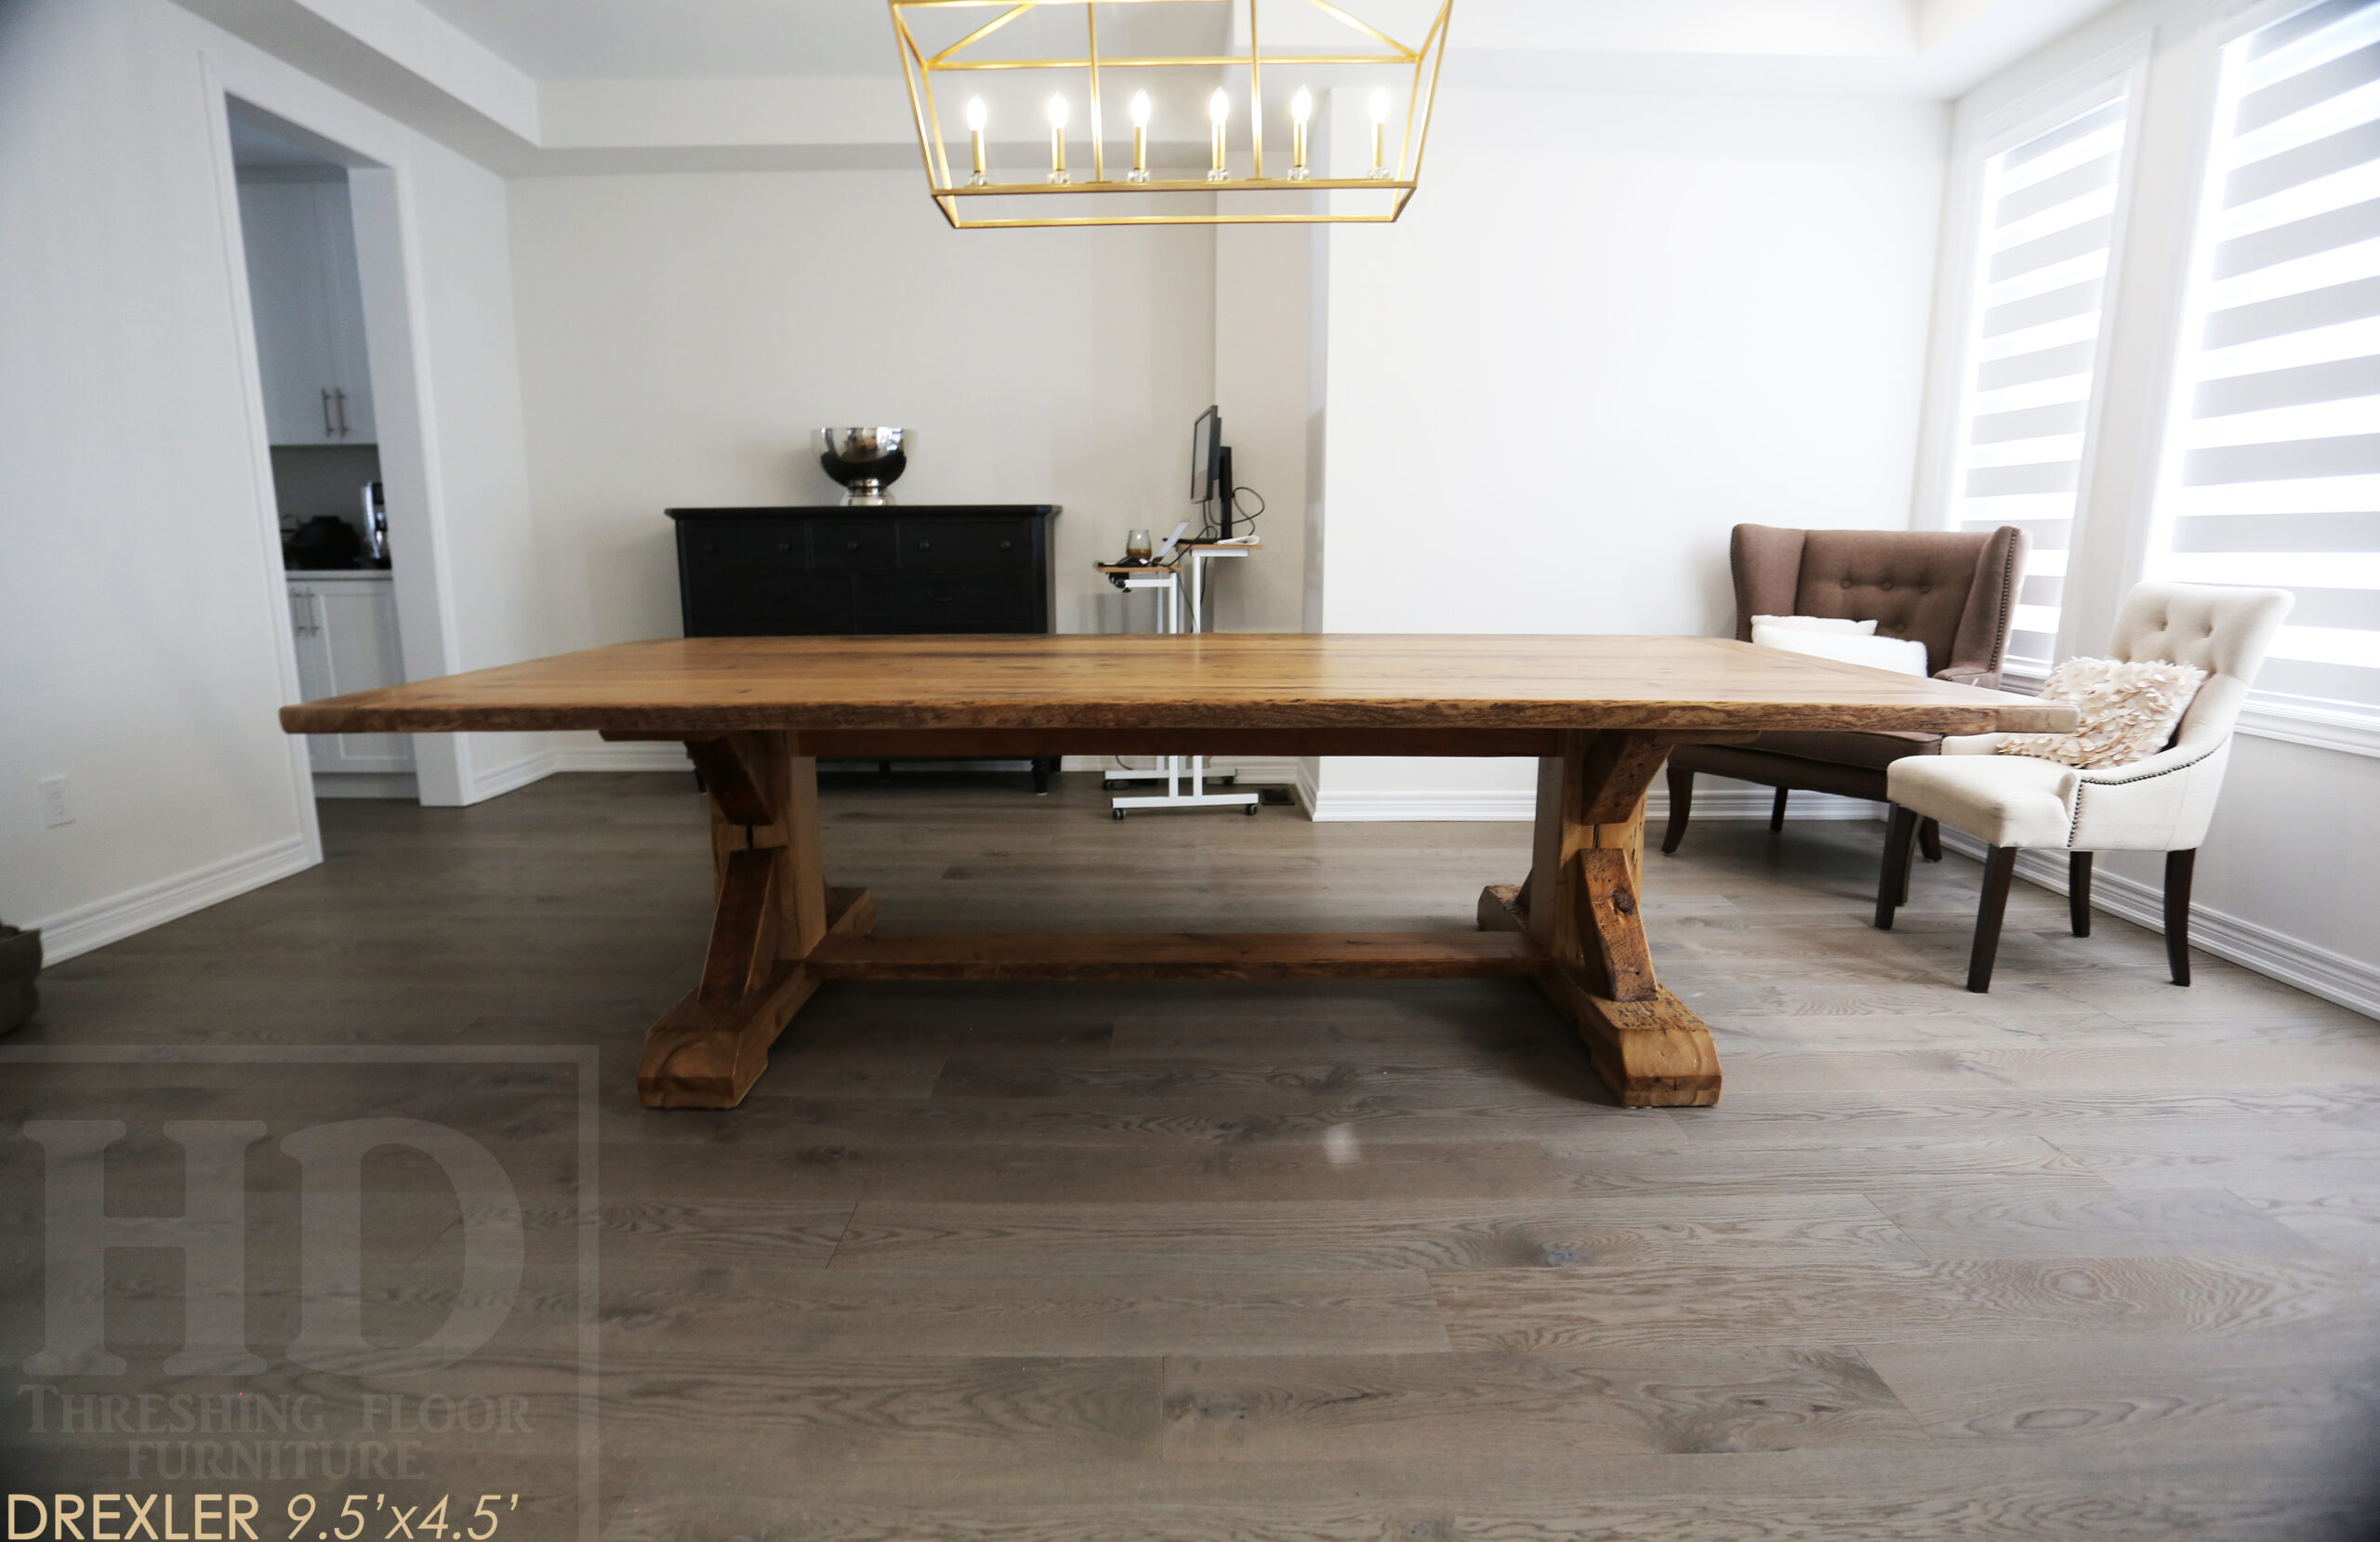 Project Summary: 9.5â€™ Reclaimed Ontario Barnwood Table we made for a Rockwood, Ontario home â€“ 4.5â€™ wide â€“ Sawbuck Base [Beam Type Option] - Old Growth Hemlock Threshing Floor Construction - Original edges & distressing maintained â€“ Bread Edge Boards â€“ Premium epoxy + matte polyurethane finish -  www.table.ca